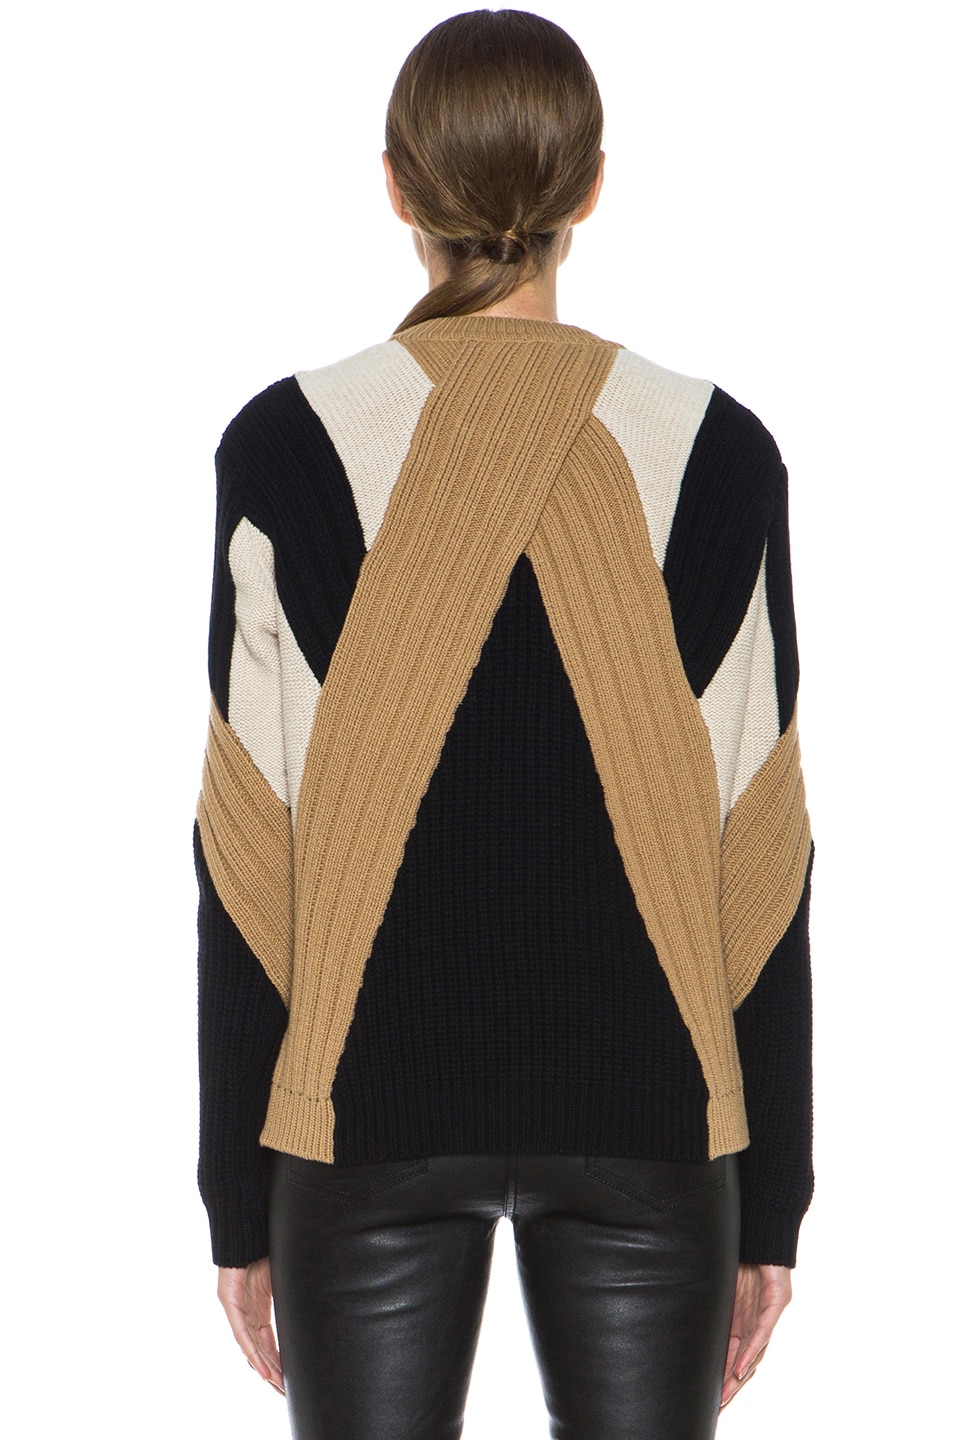 Givenchy Crew Neck Ribbed Wool-Blend Pullover in Black & Beige | FWRD